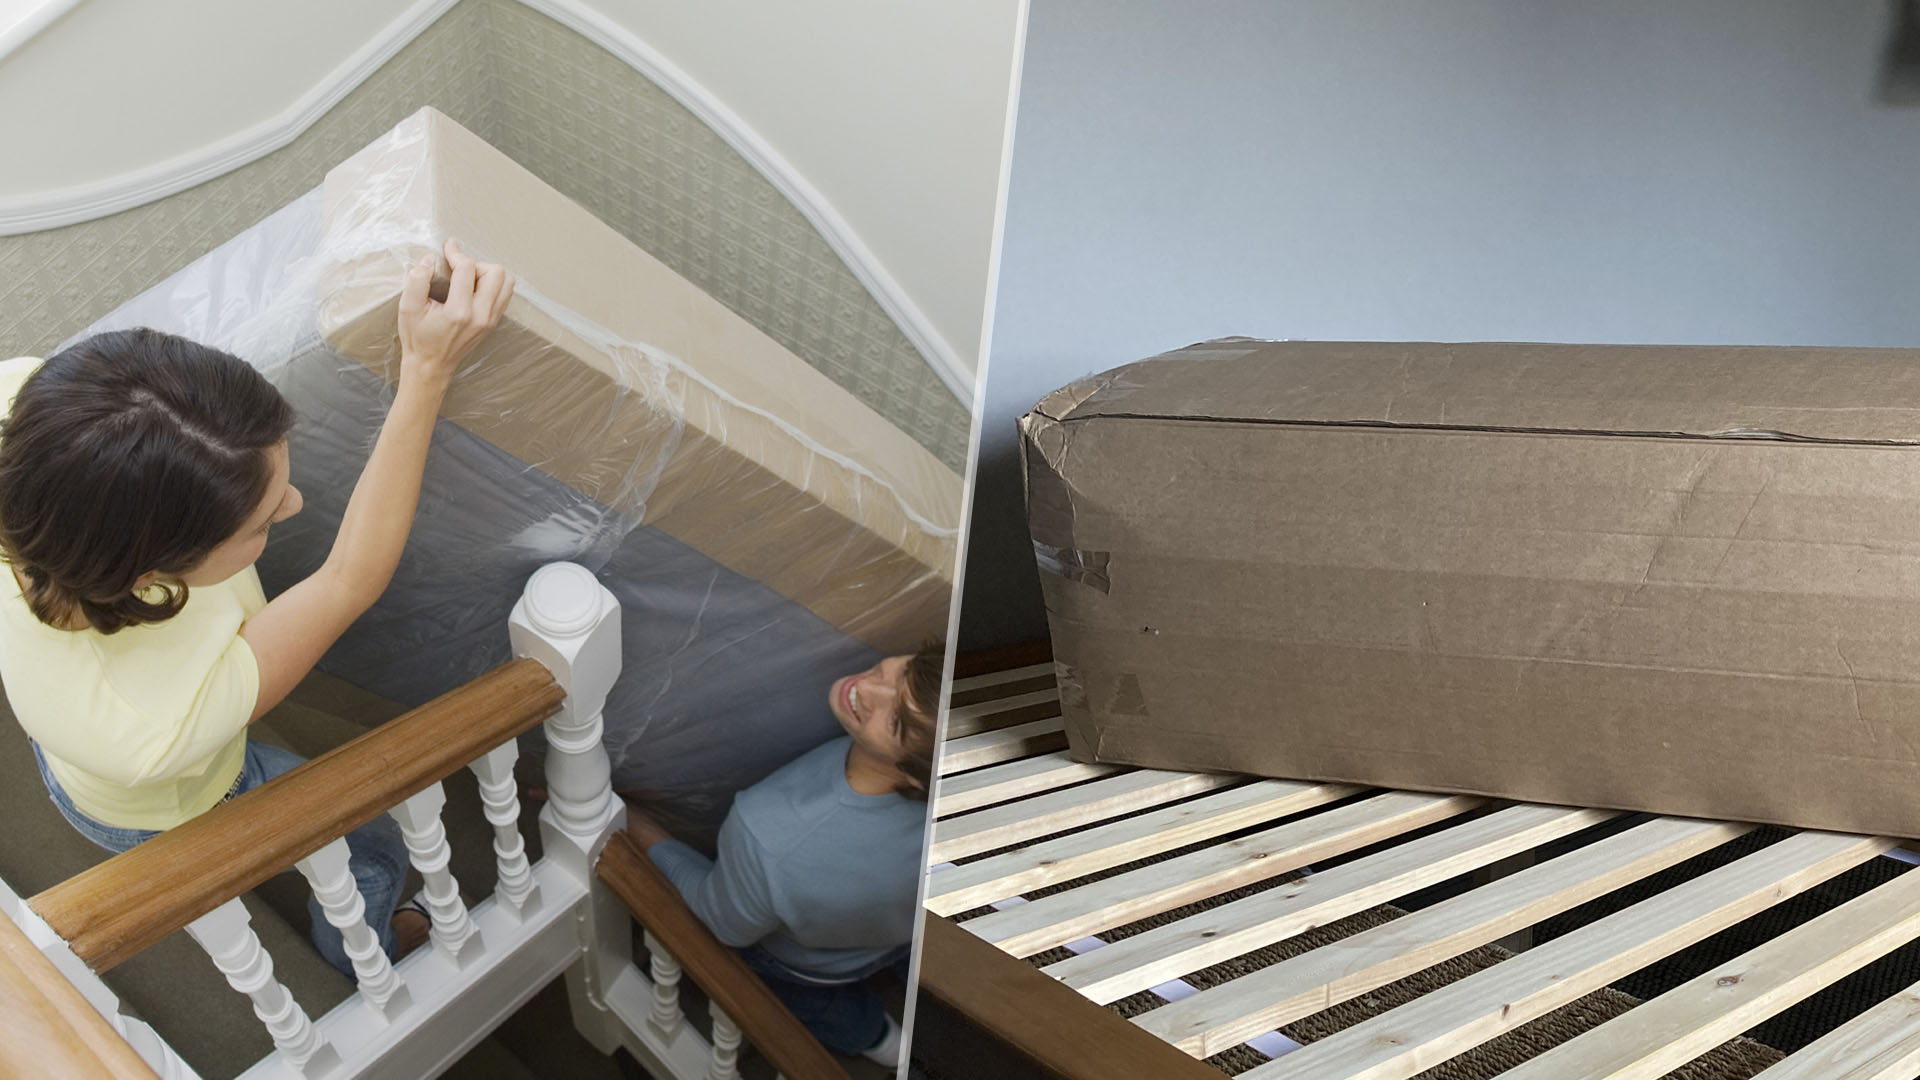 Bed in a box mattress vs traditional mattress: which is better? | TechRadar